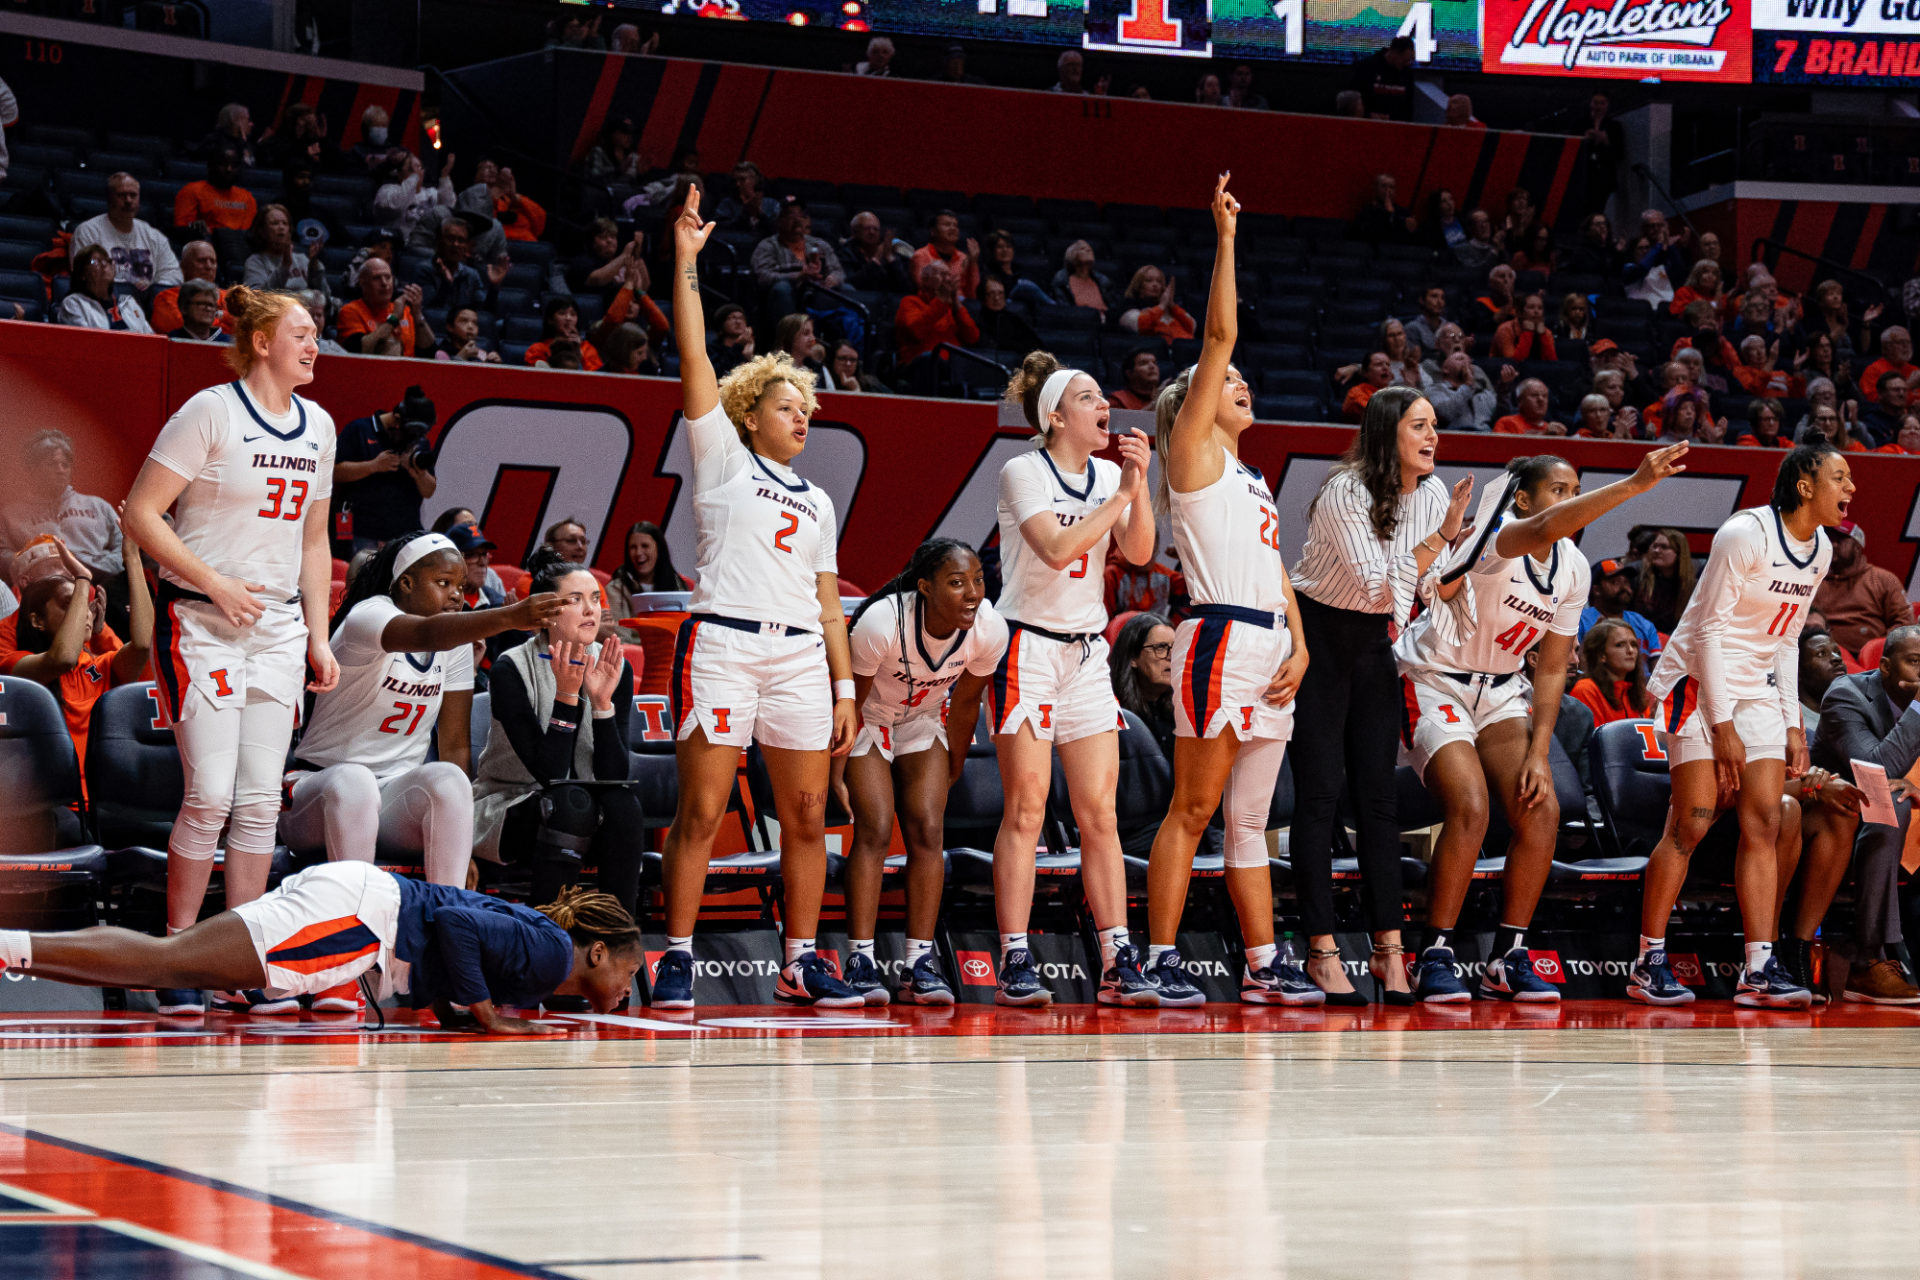 Illini women's basketball team sideline as viewed from the court. nine players are standing, squatting, or sitting and cheering on their teammakes. They are wearing white Illinois uniforms.